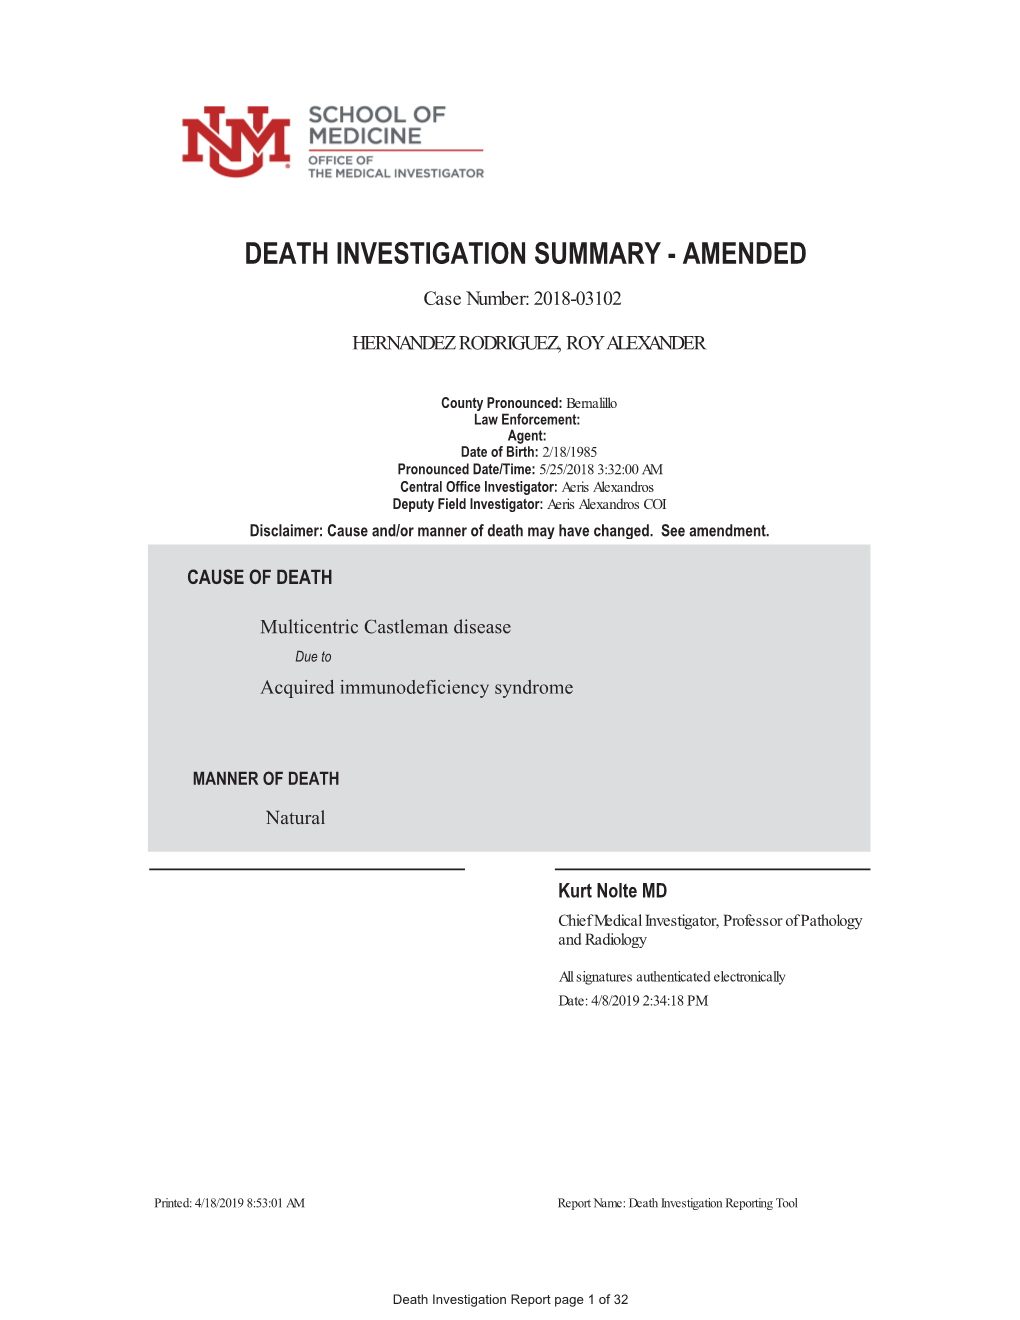 DEATH INVESTIGATION SUMMARY - AMENDED Case Number: 2018-03102